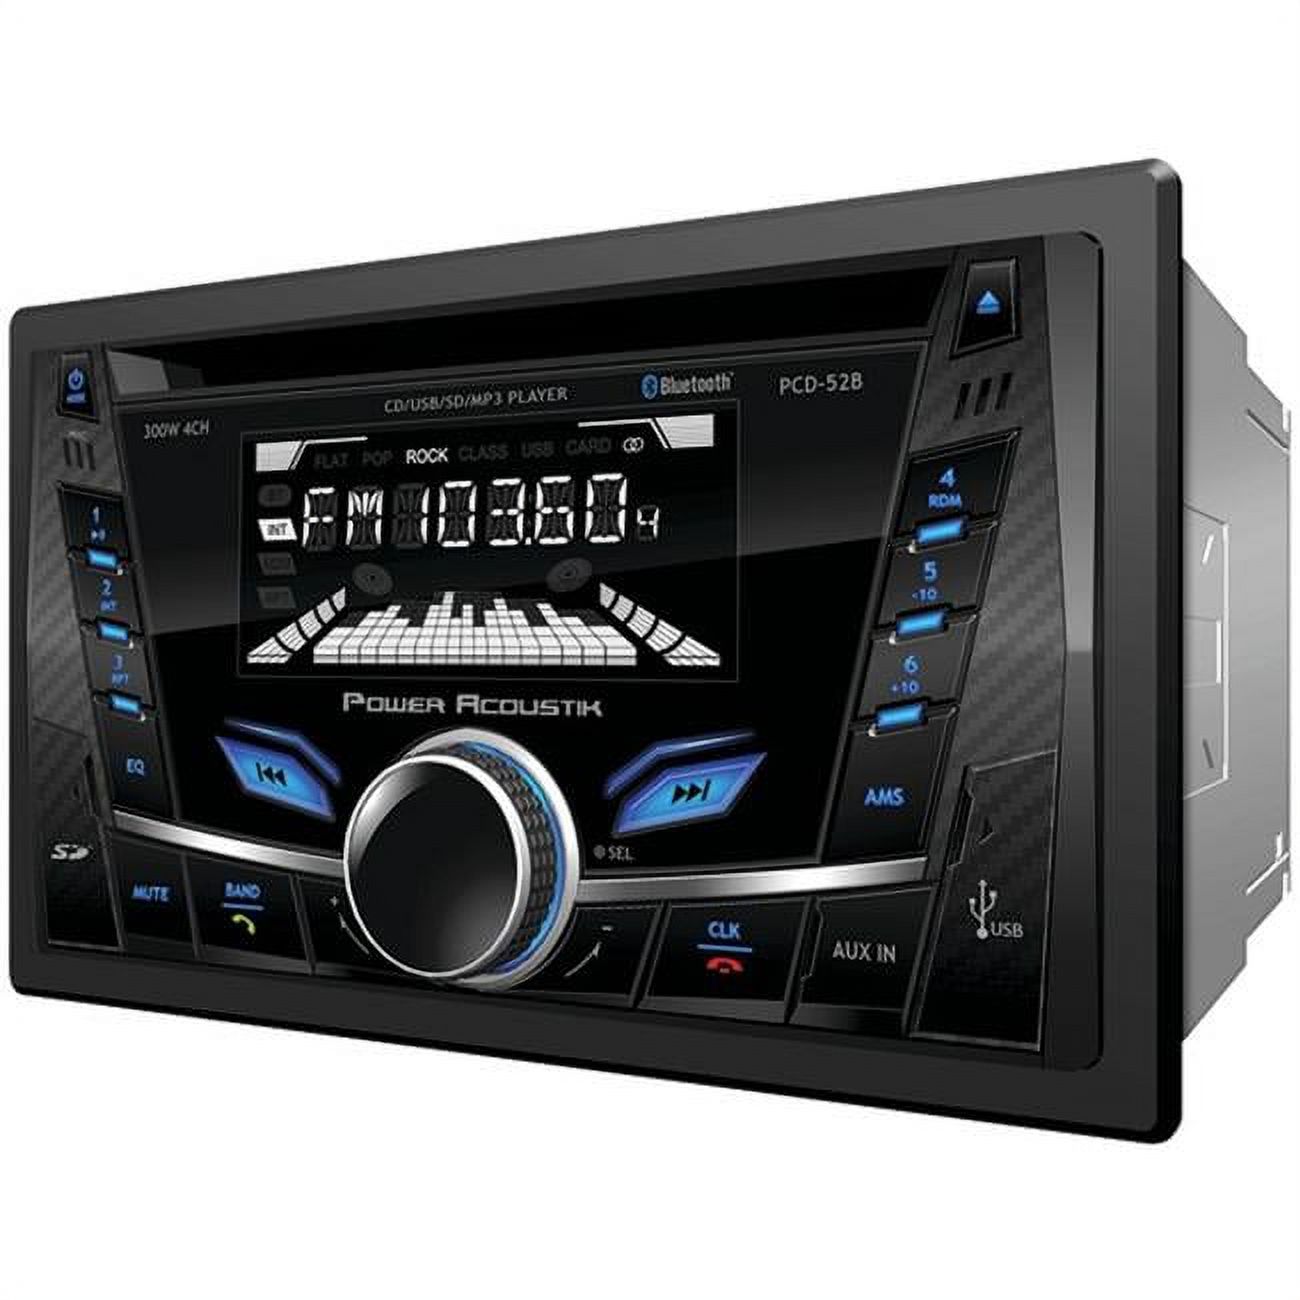 Power Acoustik PCD-52B Double-DIN In-Dash CD-MP3 AM-FM Receiver with Bluetooth and USB Playback, Black - image 1 of 4